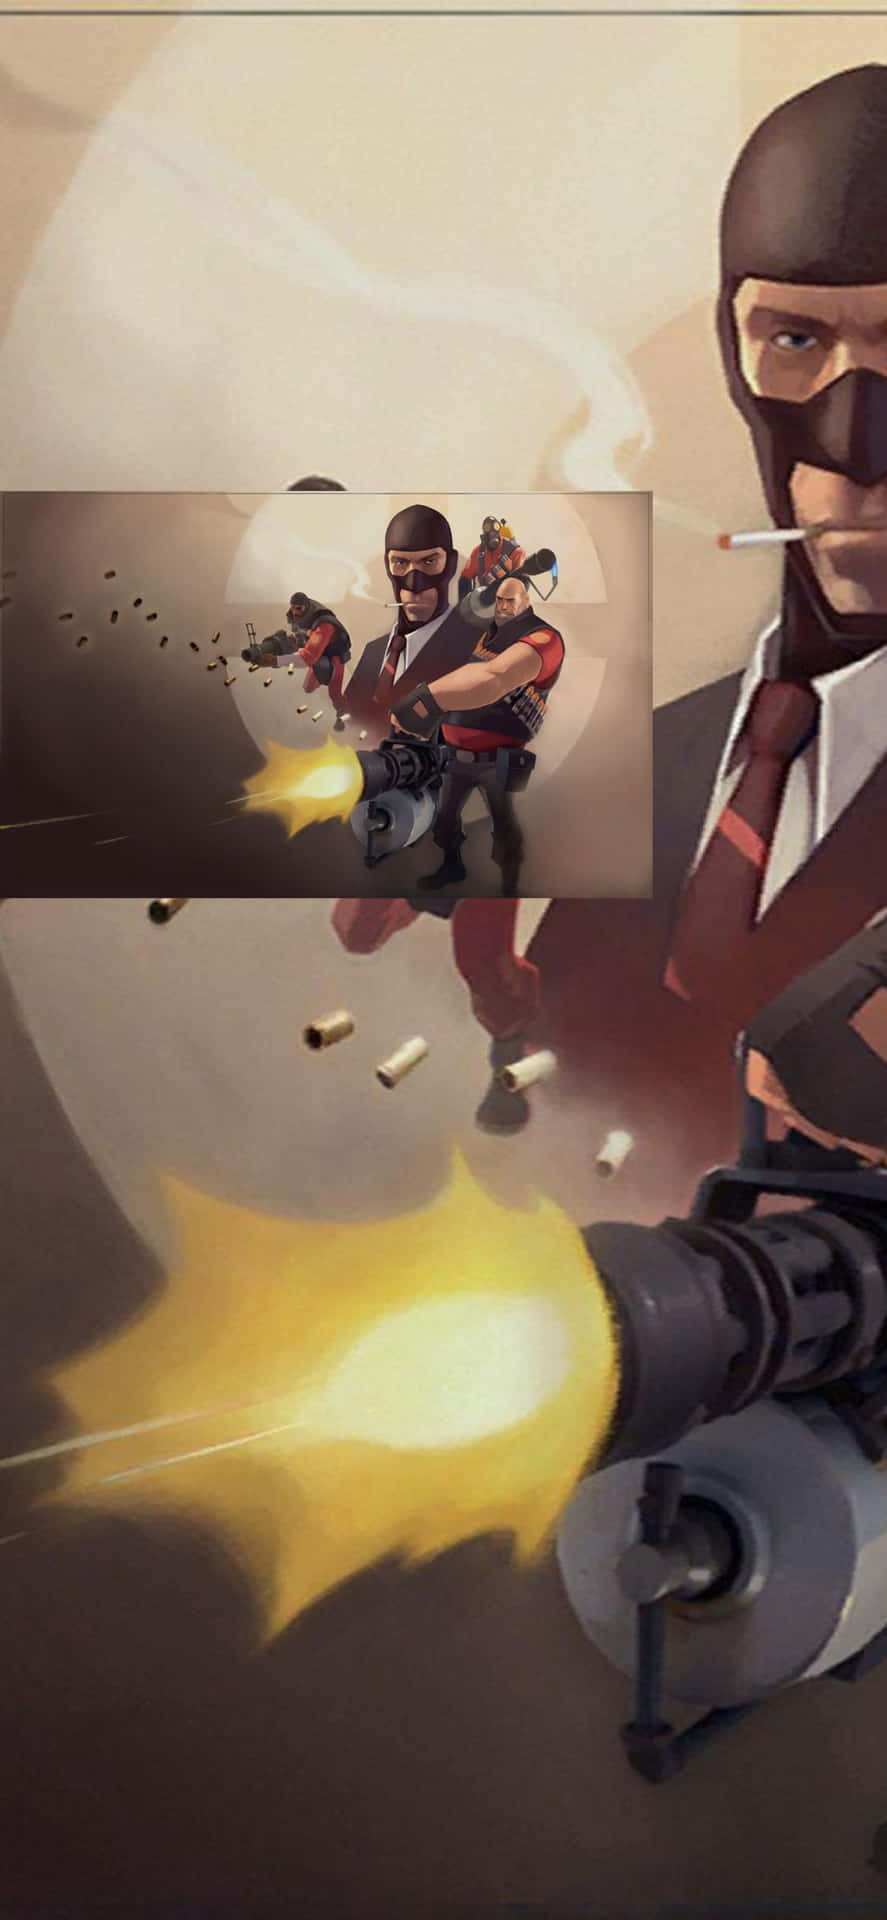 The ultimate gaming experience: Iphone XS and Team Fortress 2